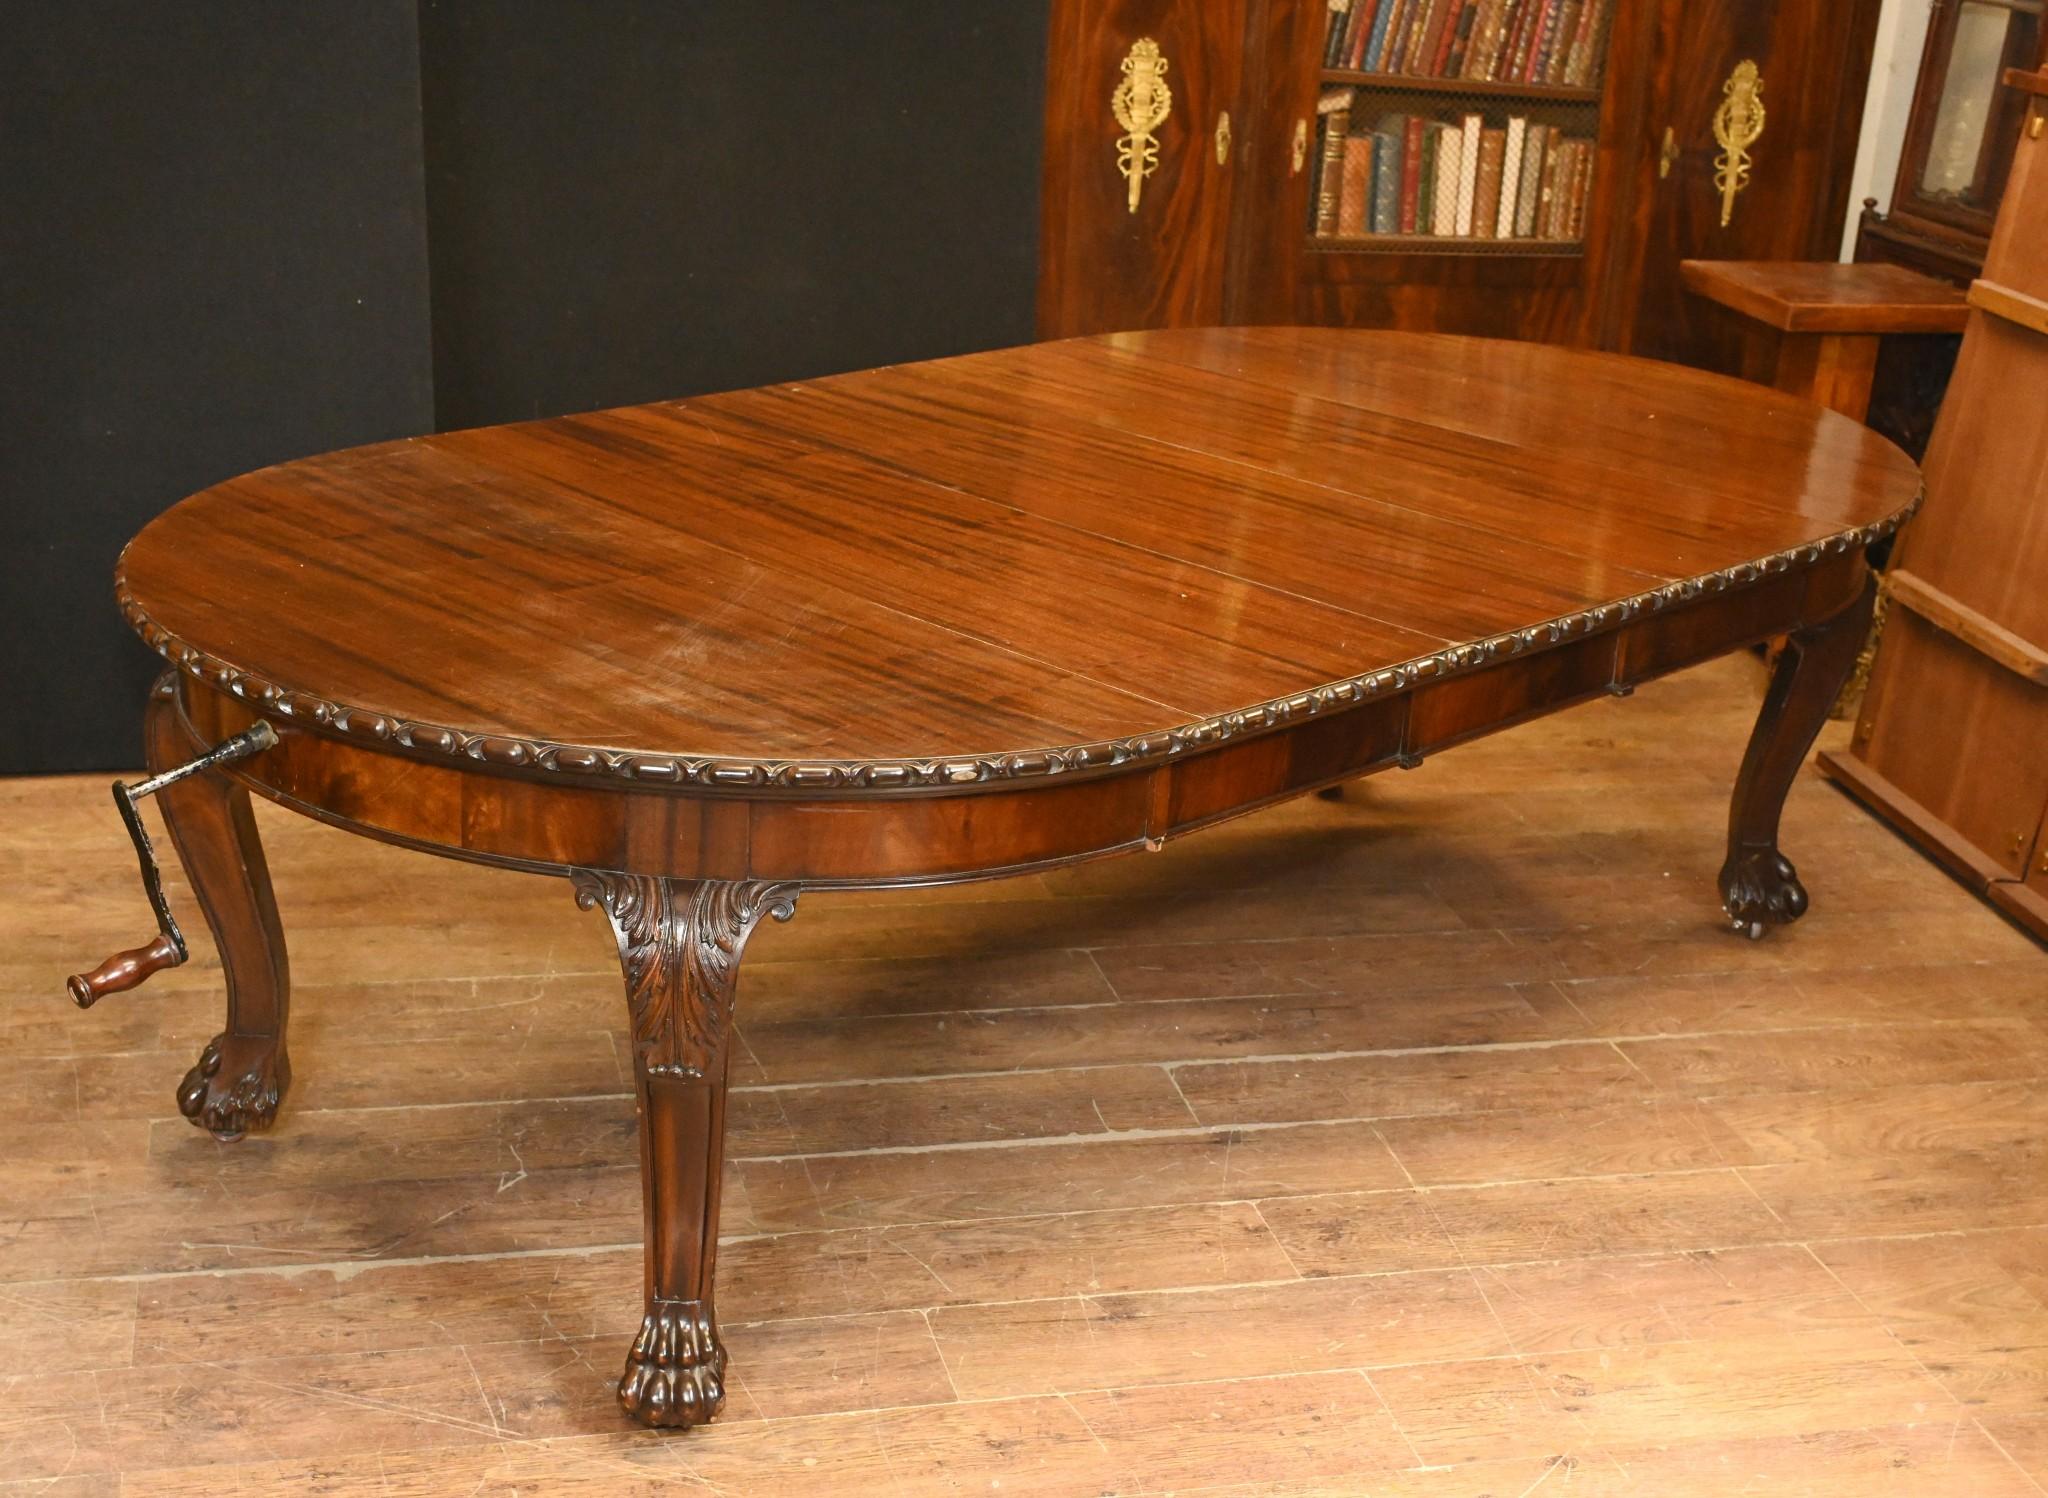 Opulent Victorian dining table in mahogany that extends
We date this to circa 1880 and it is in the Gillows manner
Extends via the windup mechanism and has three leaves (each measuring 16 inches)
We have various chairs to match if you are looking